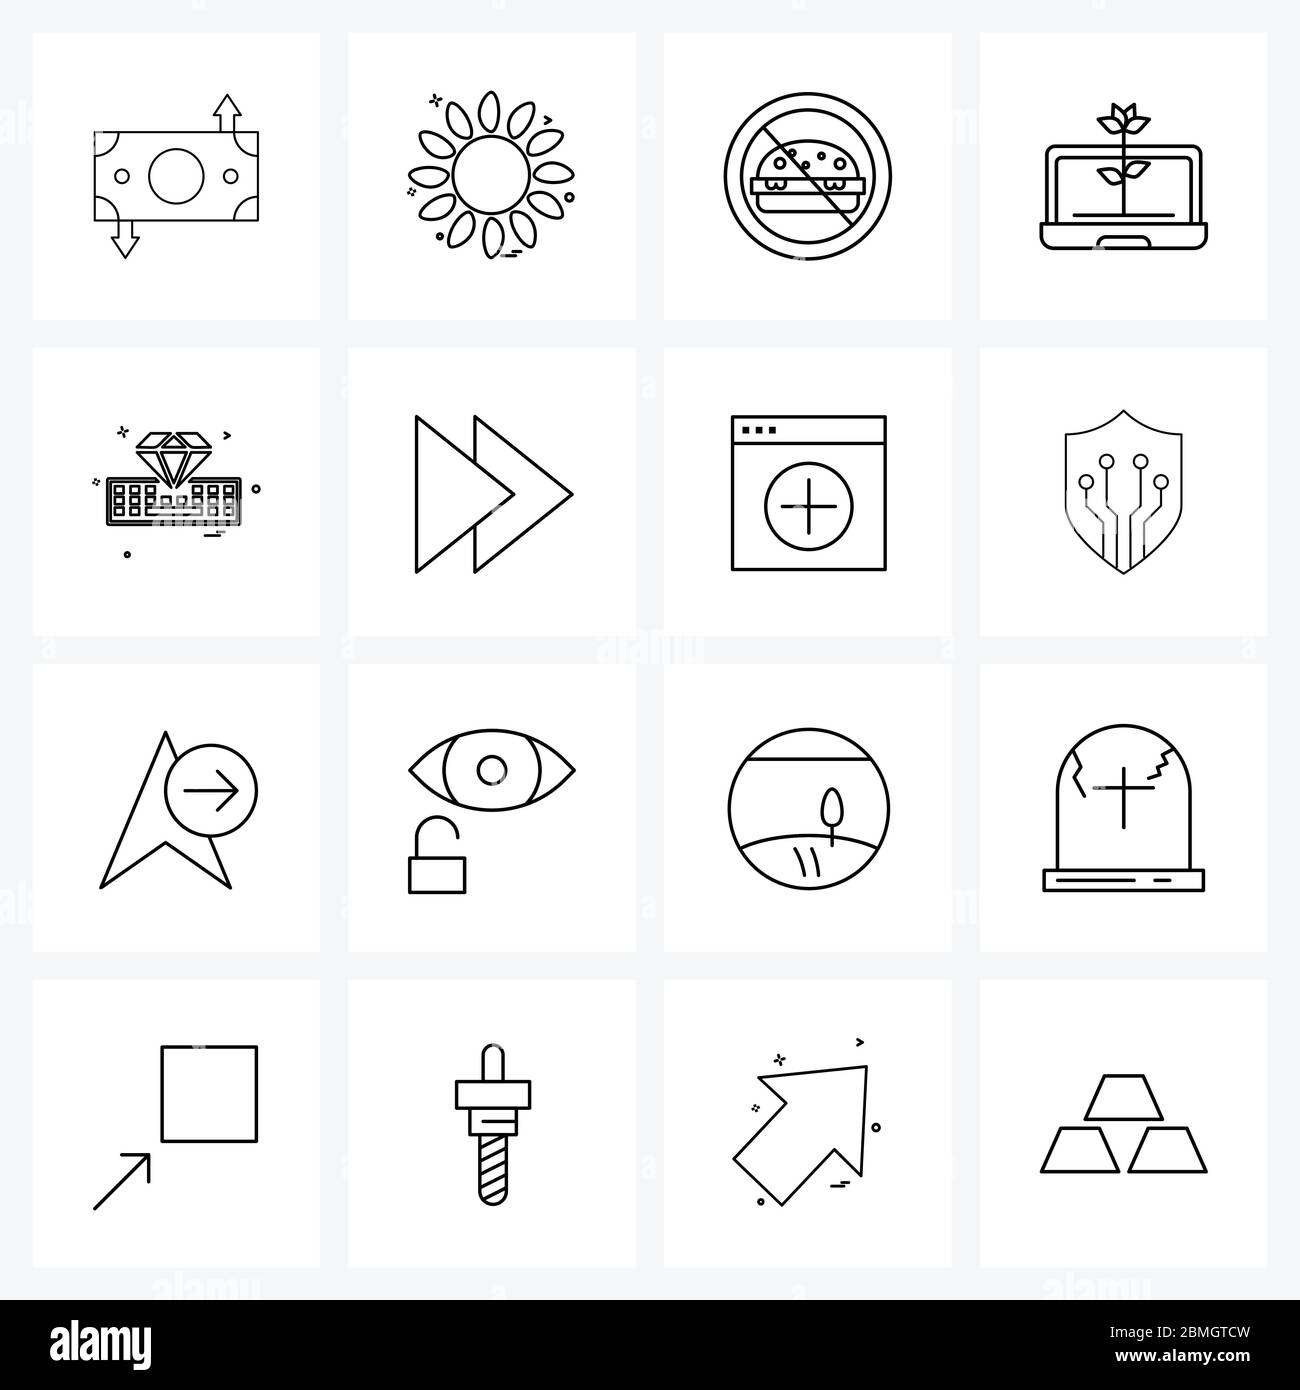 Set of 16 UI Icons and symbols for plant, energy, daisy flower, laptop ...